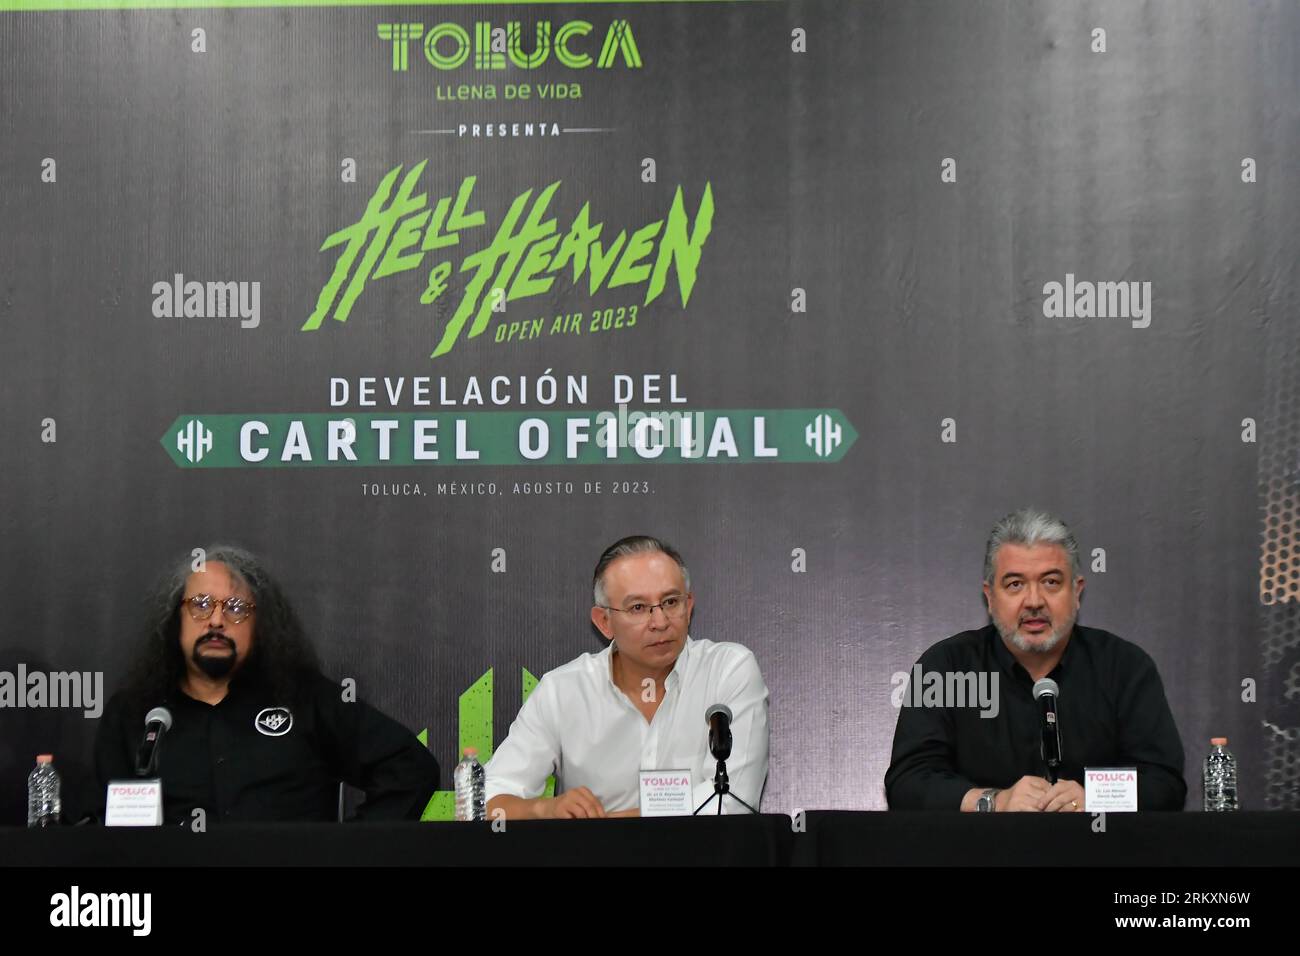 August 24, 2023 Toluca , Mexico : Juan Carlos Guerrero, Official Spokesperson for Hell and Heaven Festival, Raymundo Martinez Carbajal, Mayor of Toluca, Luis Manuel García Aguilar, General Director of Centro Dinámico Pegaso, during a press conference where they officially presented the poster for the Hell and Heaven Open Air 2023 music festival, which will take place at the Pegaso Dynamic Center in the city of Toluca from November 3 to 5, 2023. on August 24, 2023 in Toluca, México. (Photo by Arturo Hernández / Eyepix Group/Sipa USA) Stock Photo